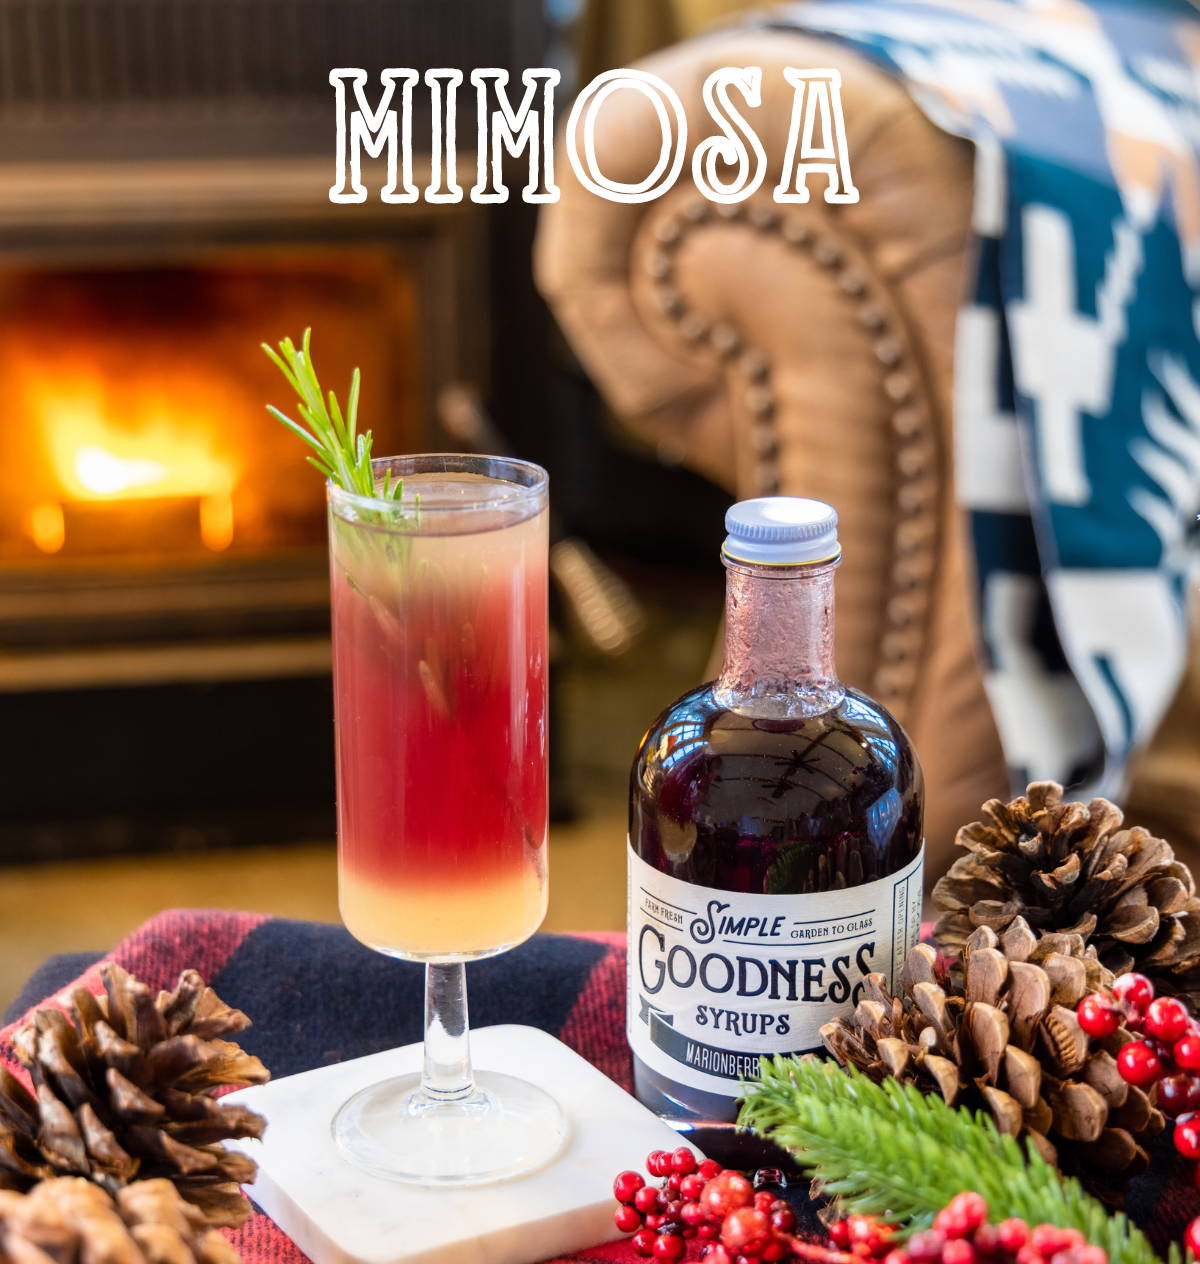 a layered mimosa cocktail with winter styling, on a plaid blanket